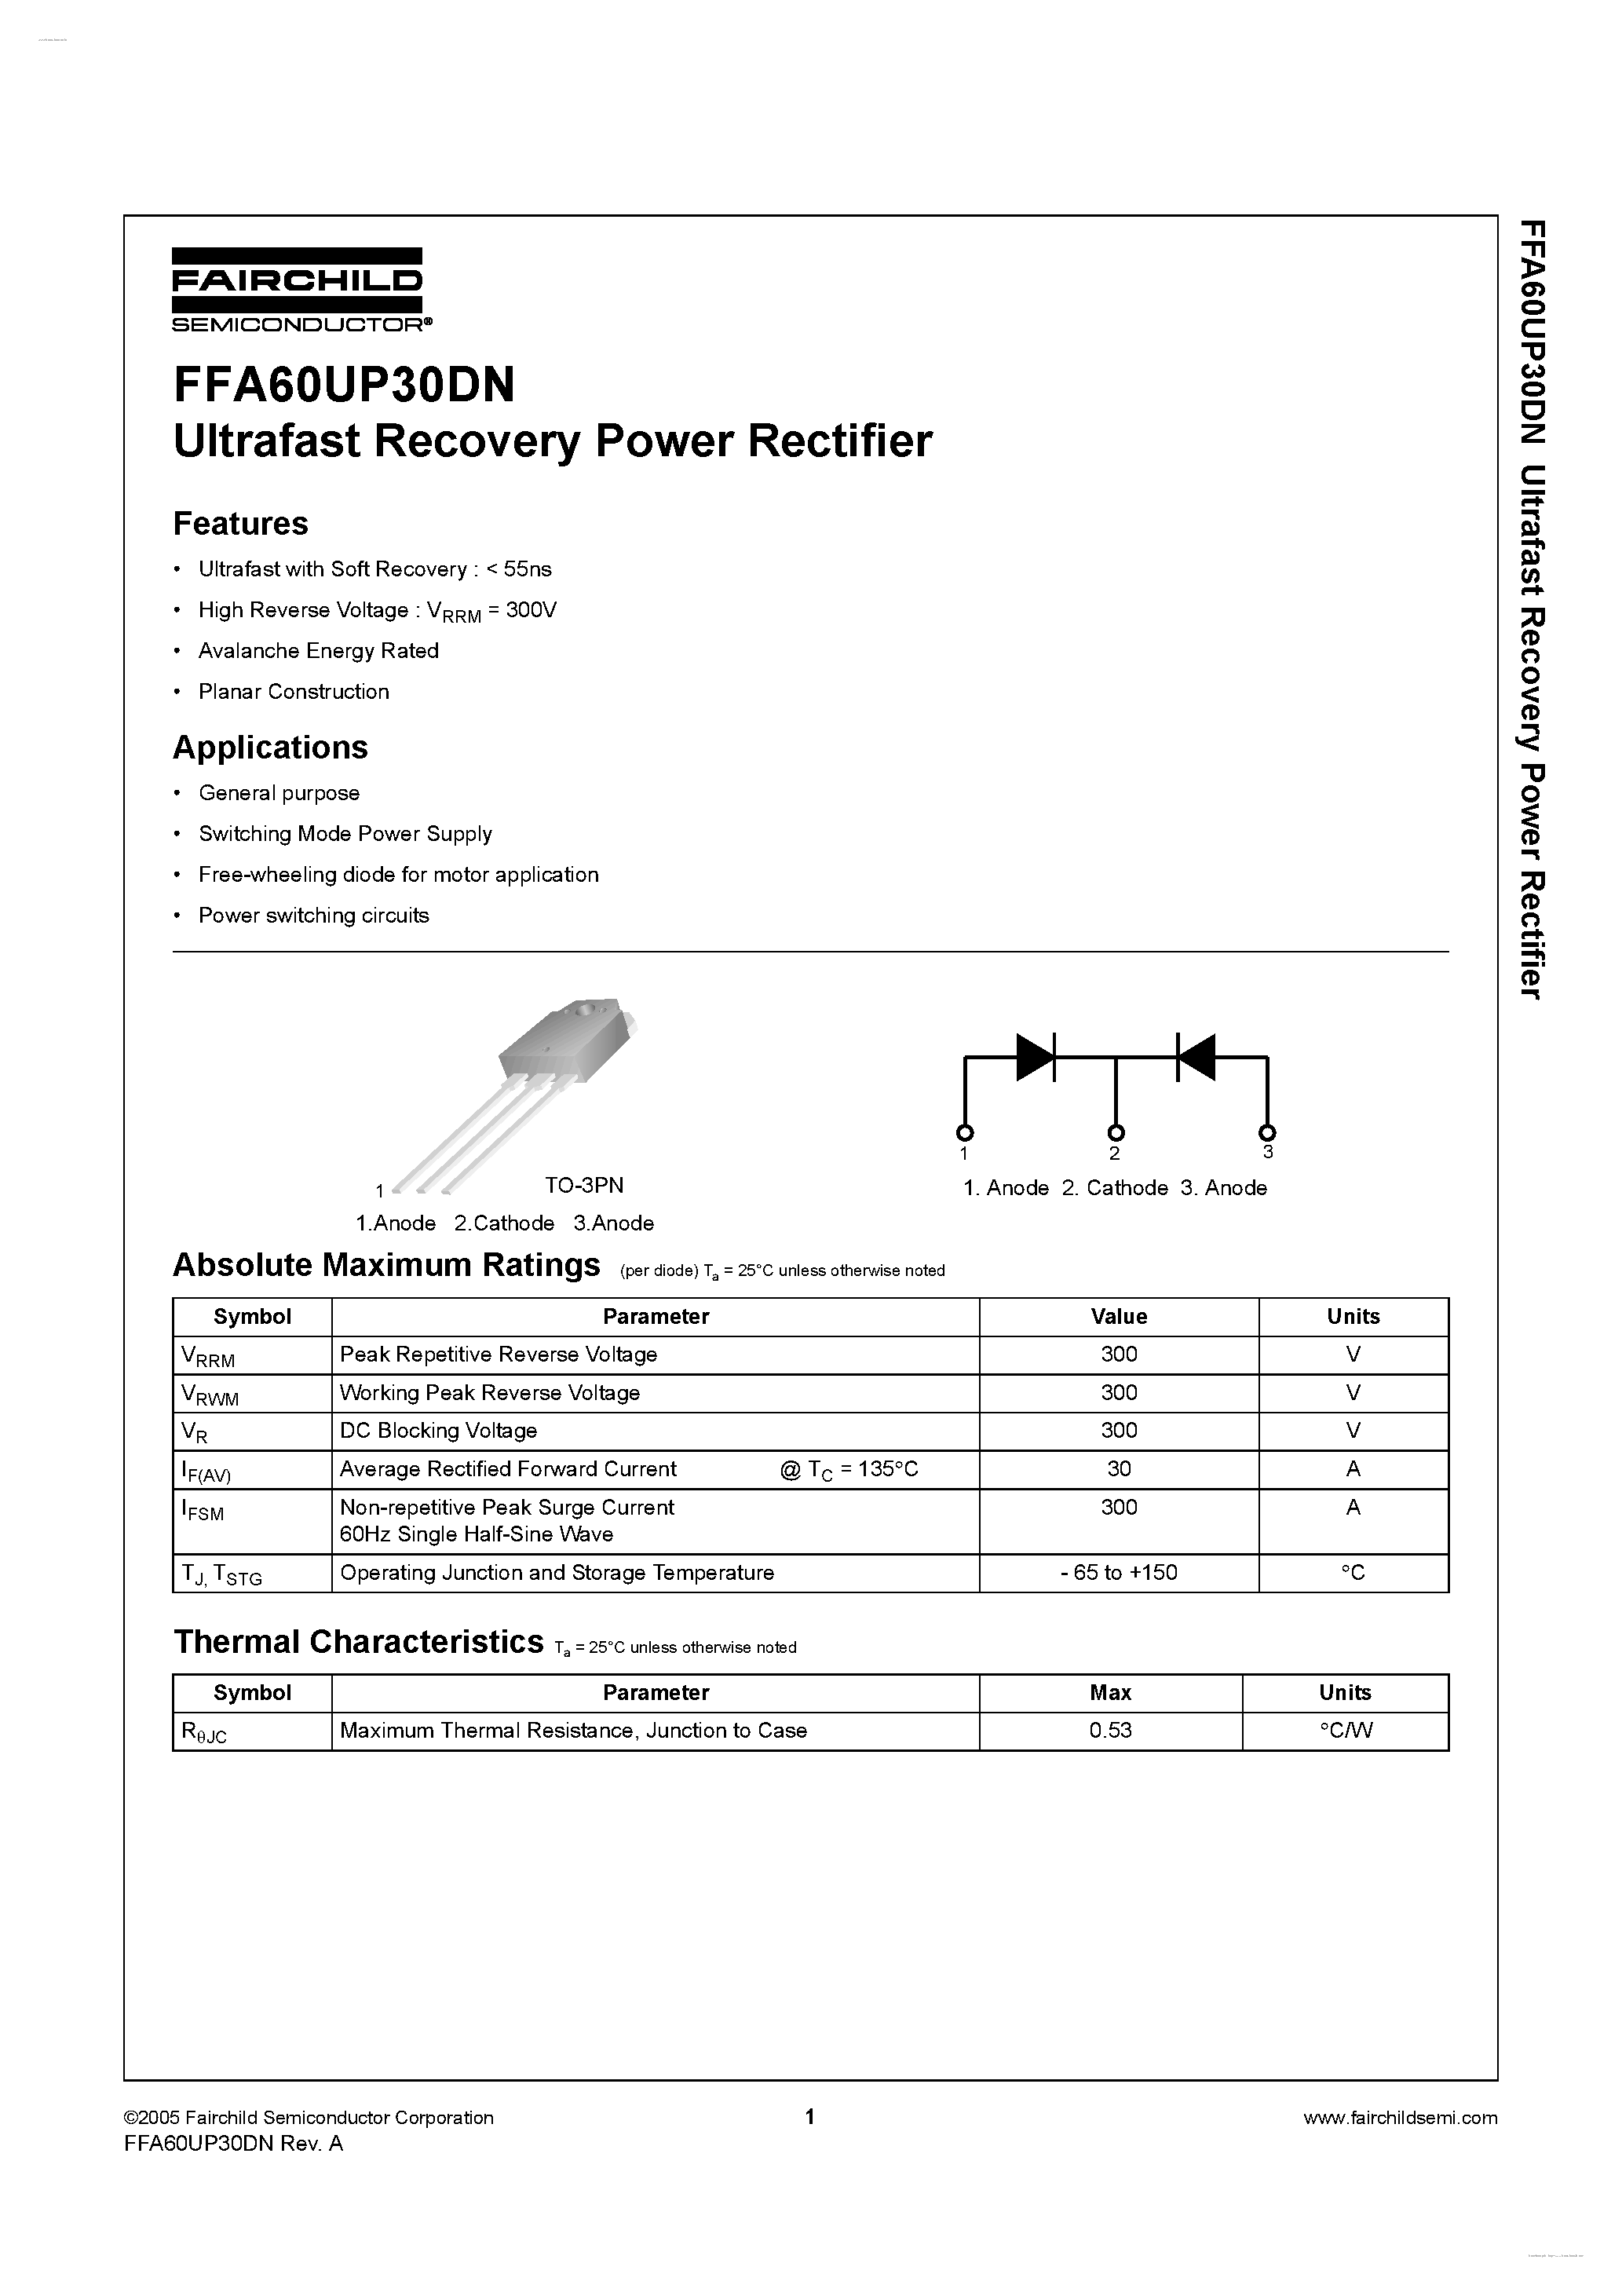 Datasheet F60UP30DN - Search -----> FFAF60UP30DN page 1